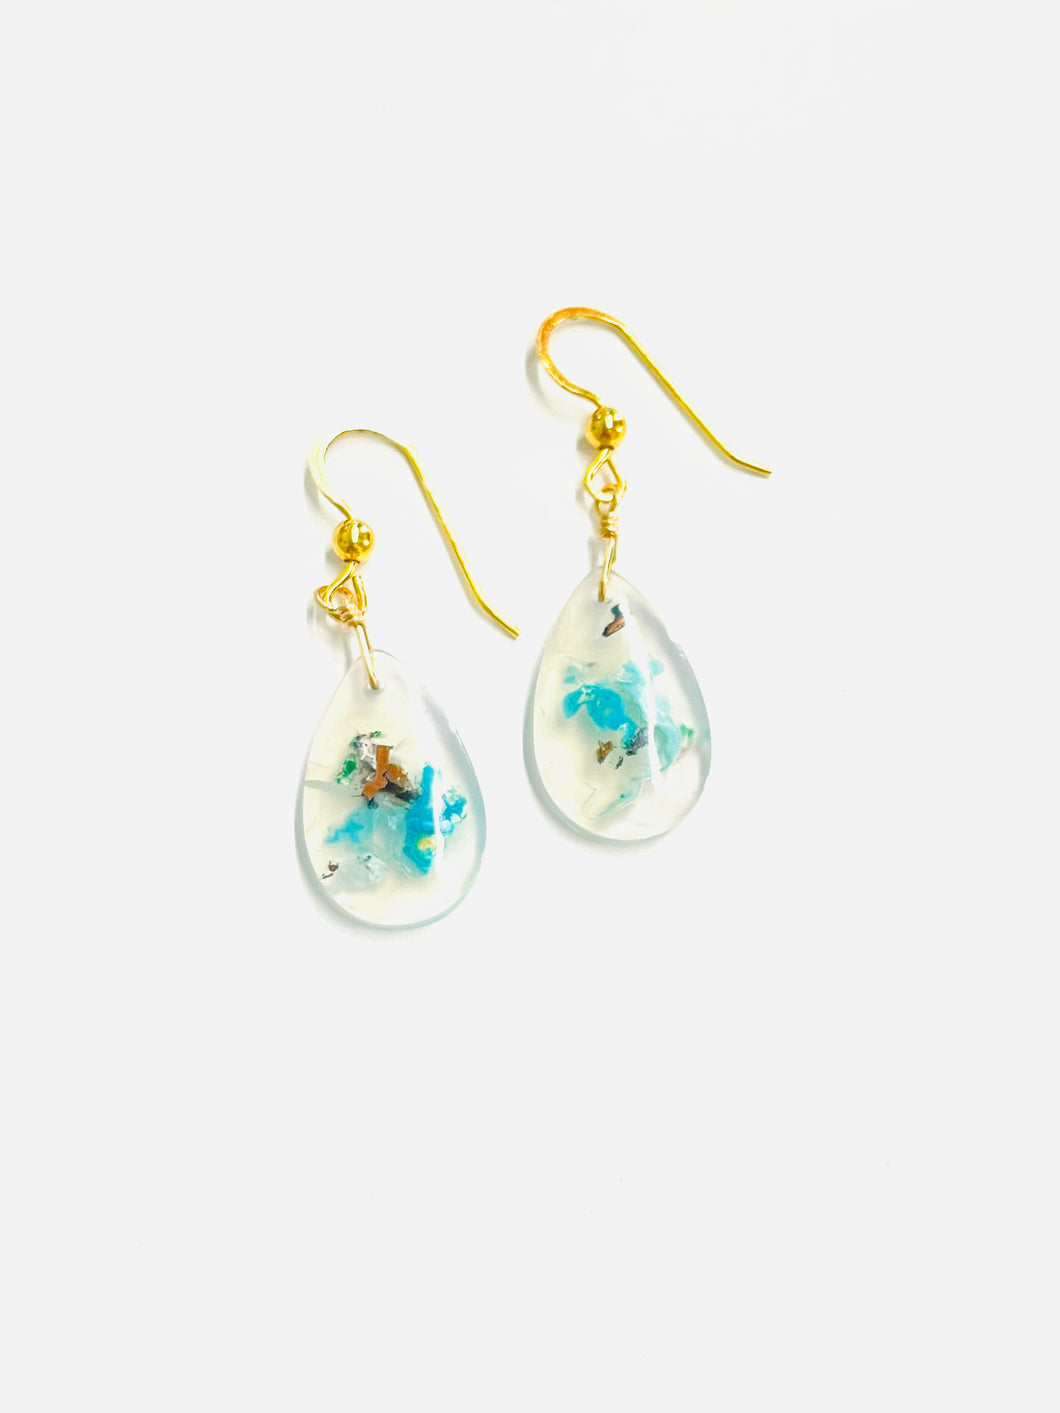 Earrings with blue chrysocolla